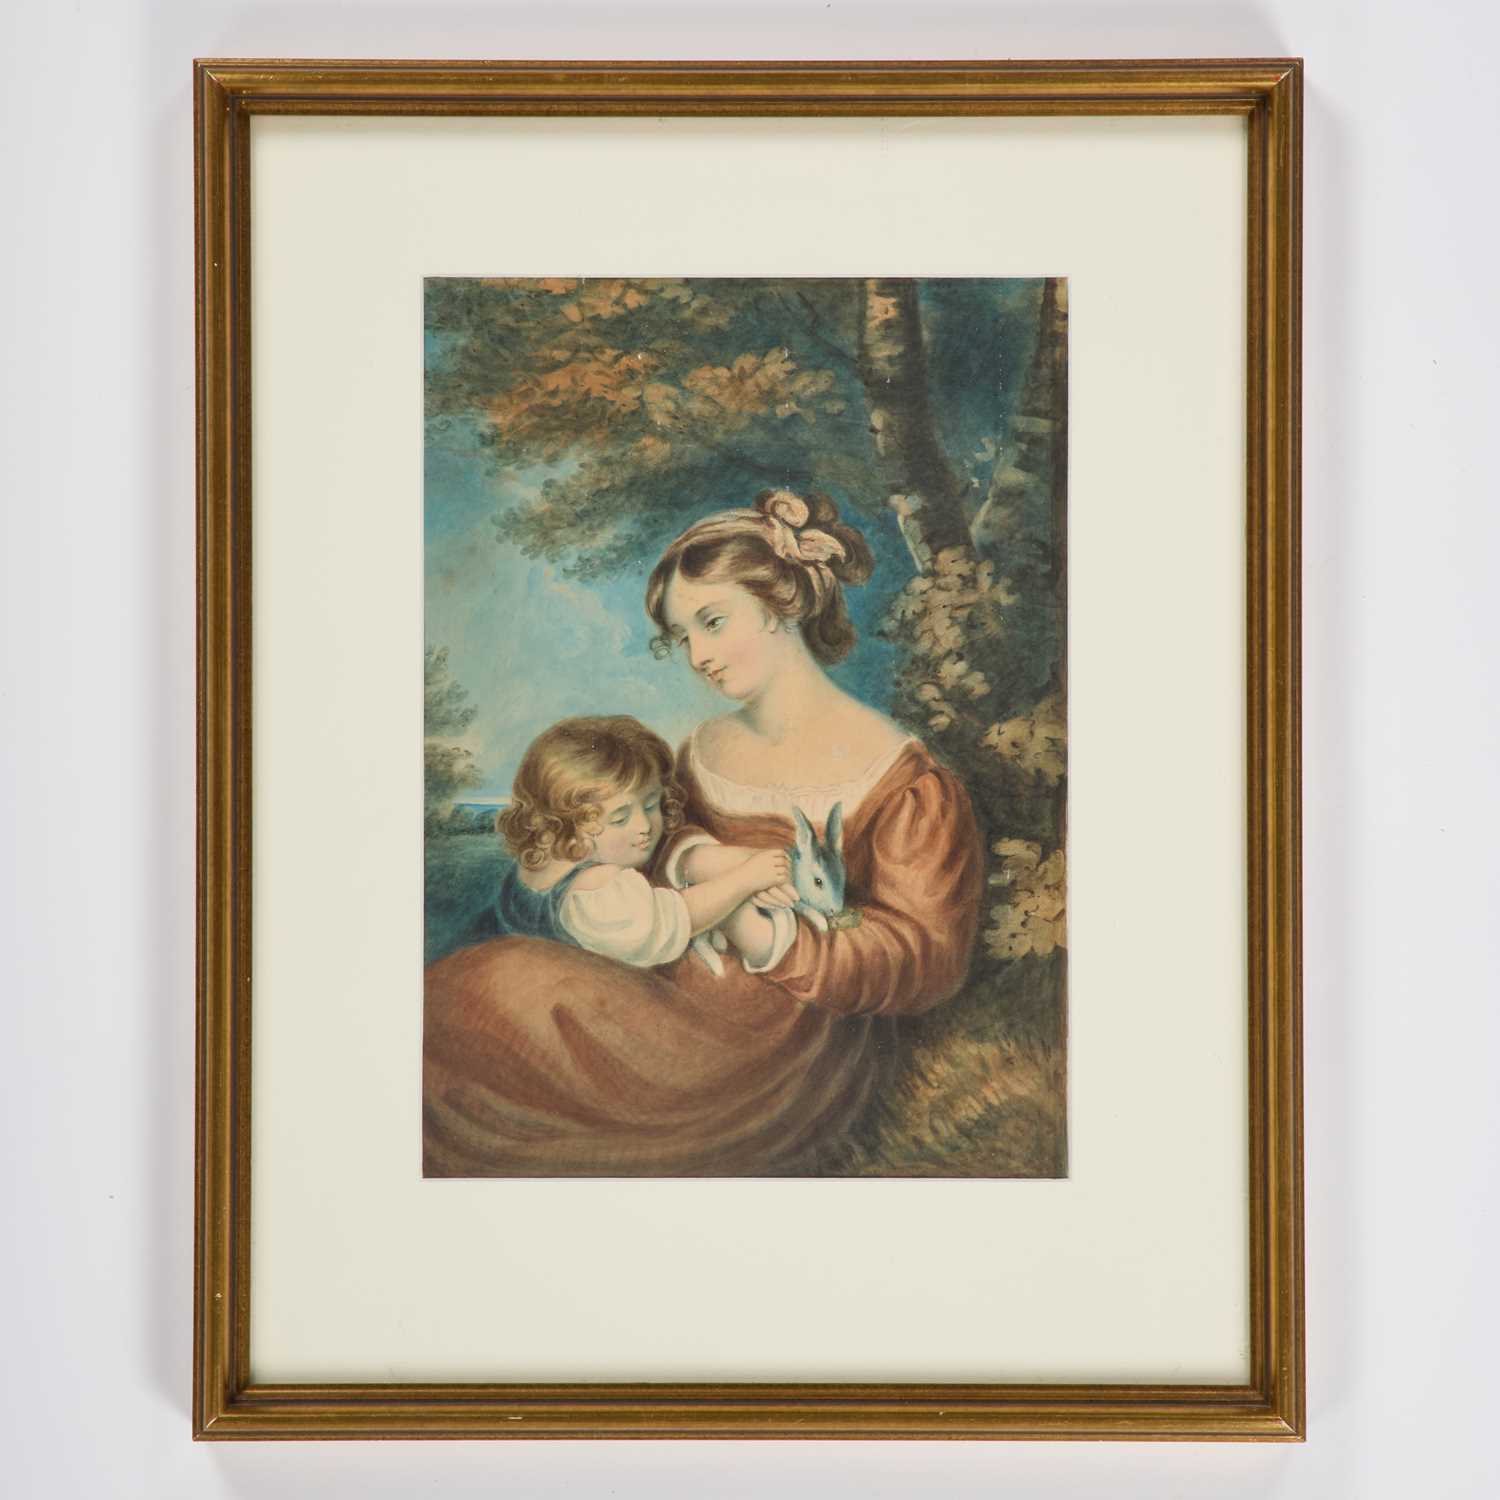 19TH CENTURY ENGLISH SCHOOL MOTHER AND CHILD HOLDING A RABBIT - Image 2 of 3